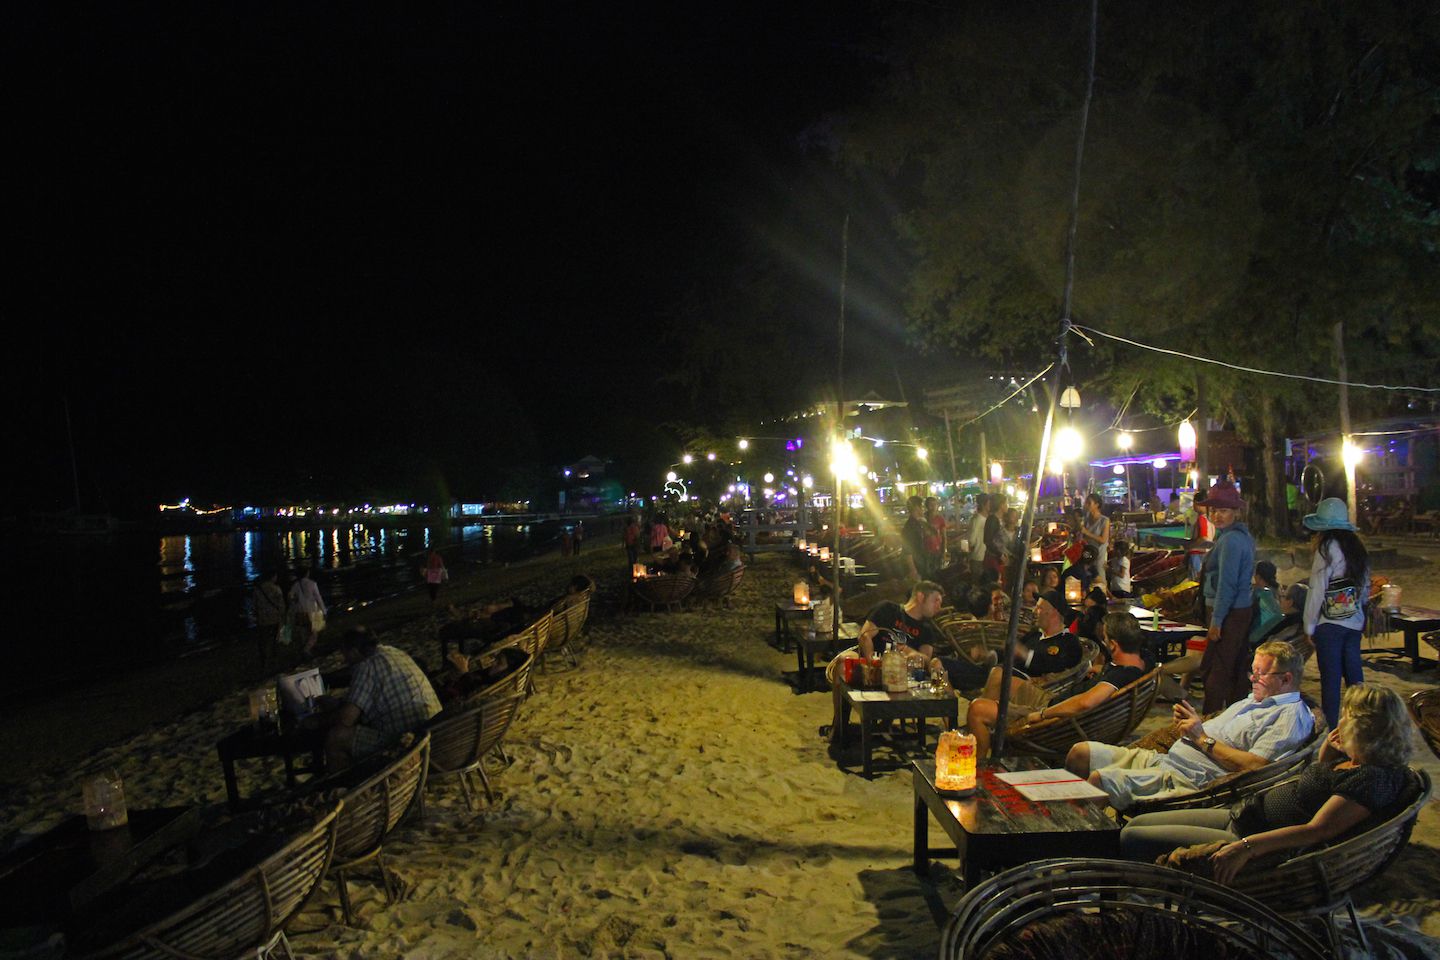 Nightlife at the Serendipity Beach in Sihanoukville